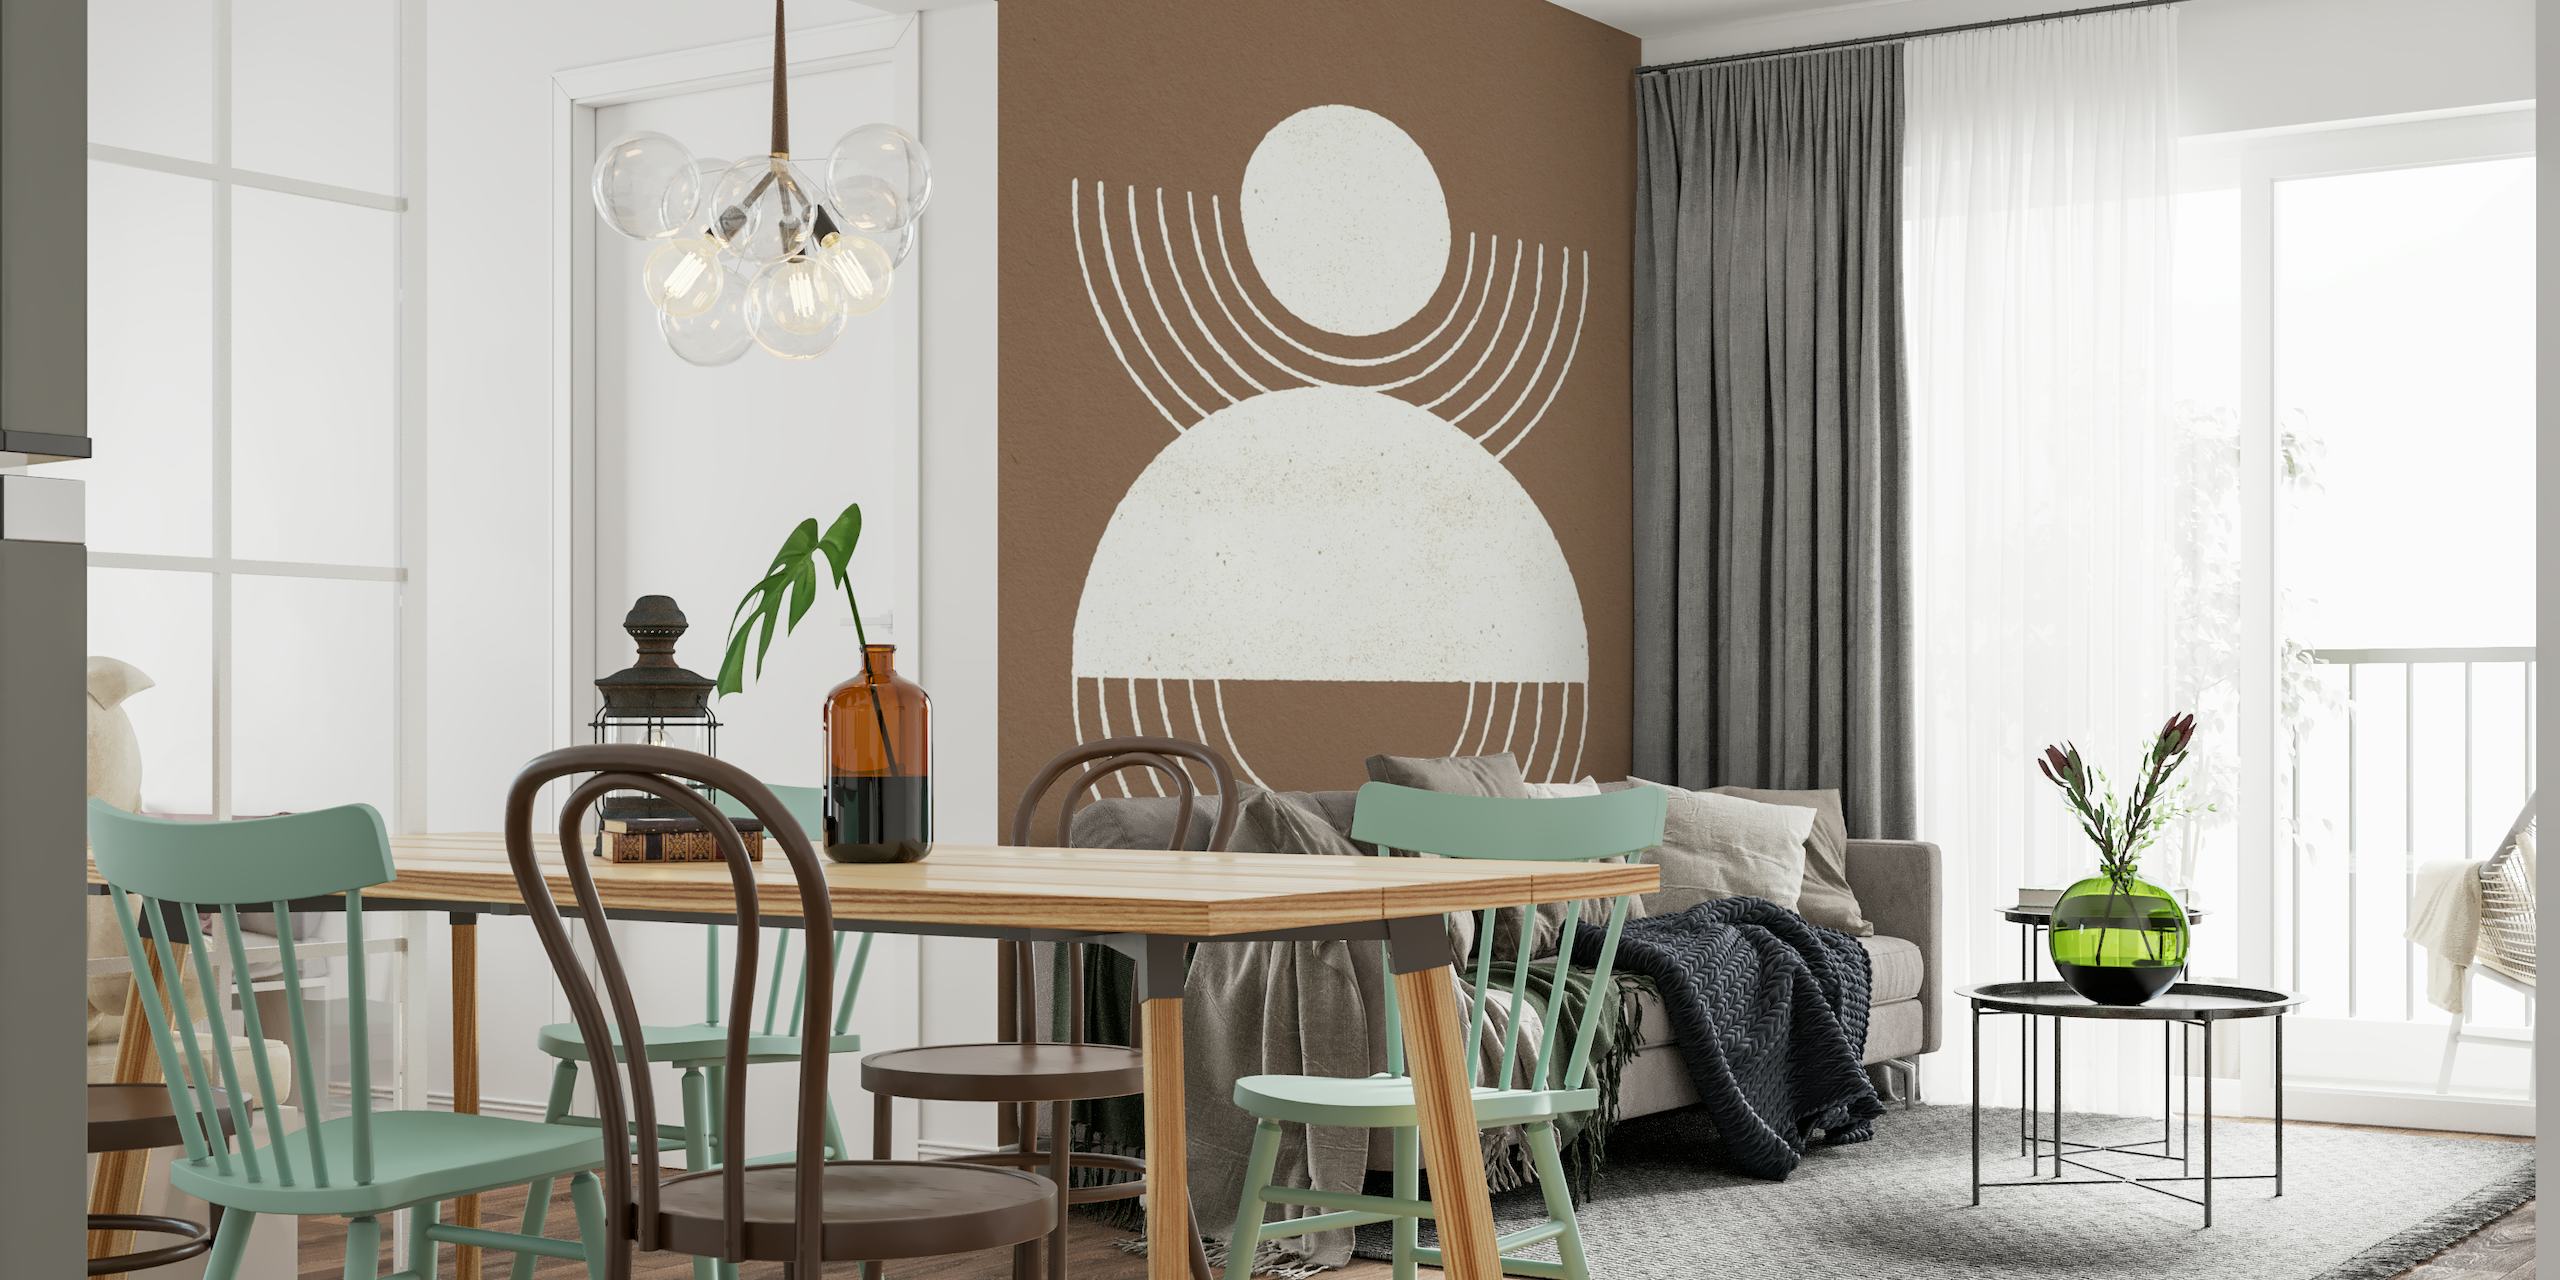 Abstract geometric wall mural featuring circles and lines in white over a warm brown background.